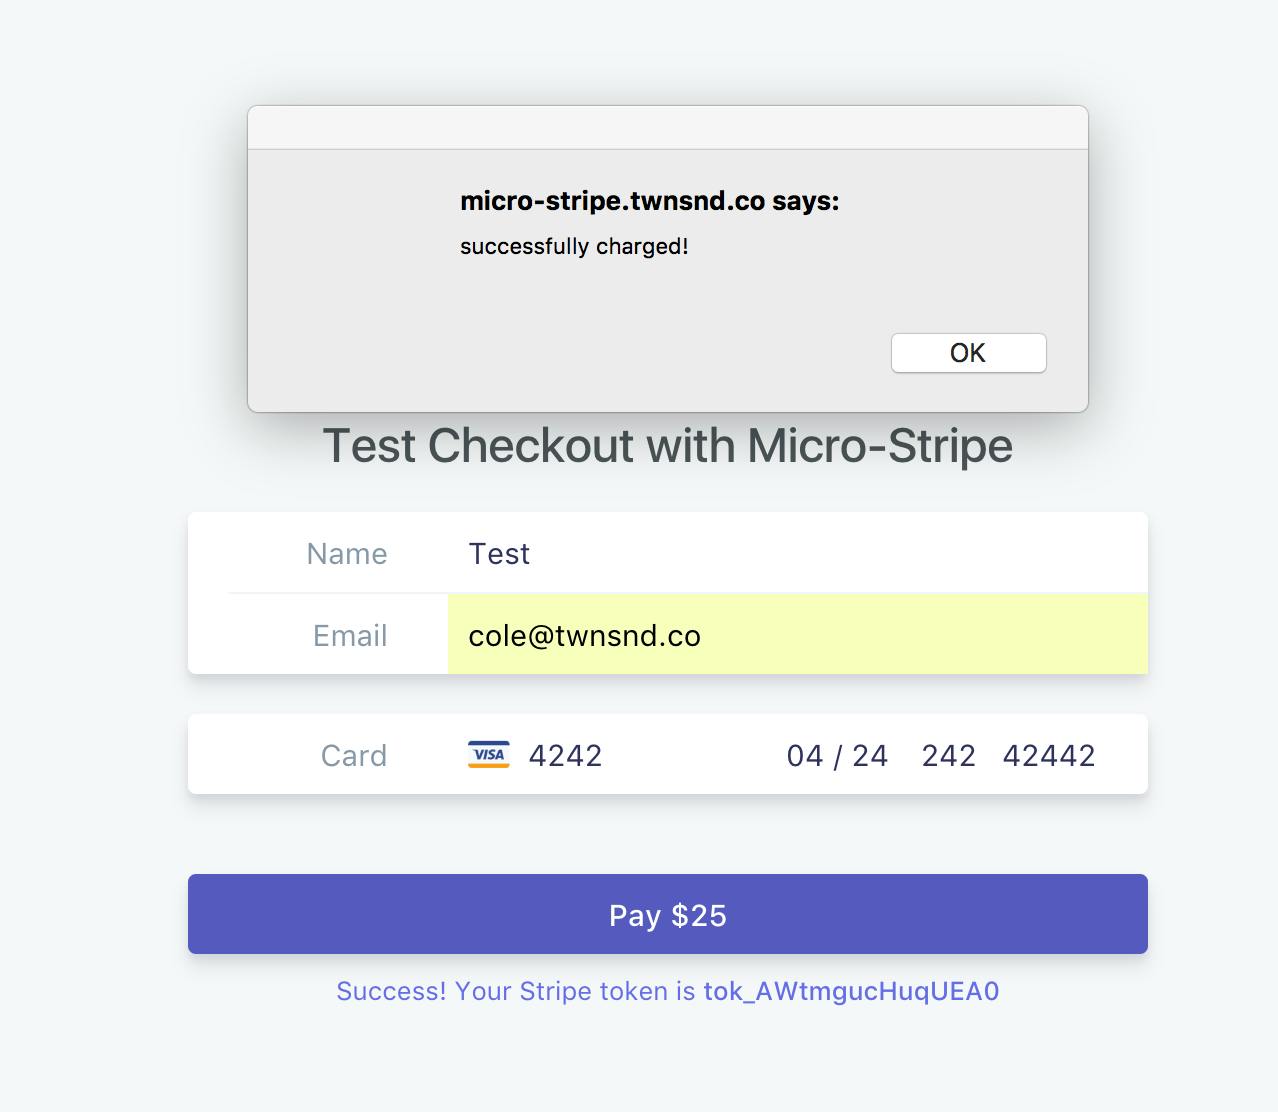 CPS Test by CPS Test on Dribbble